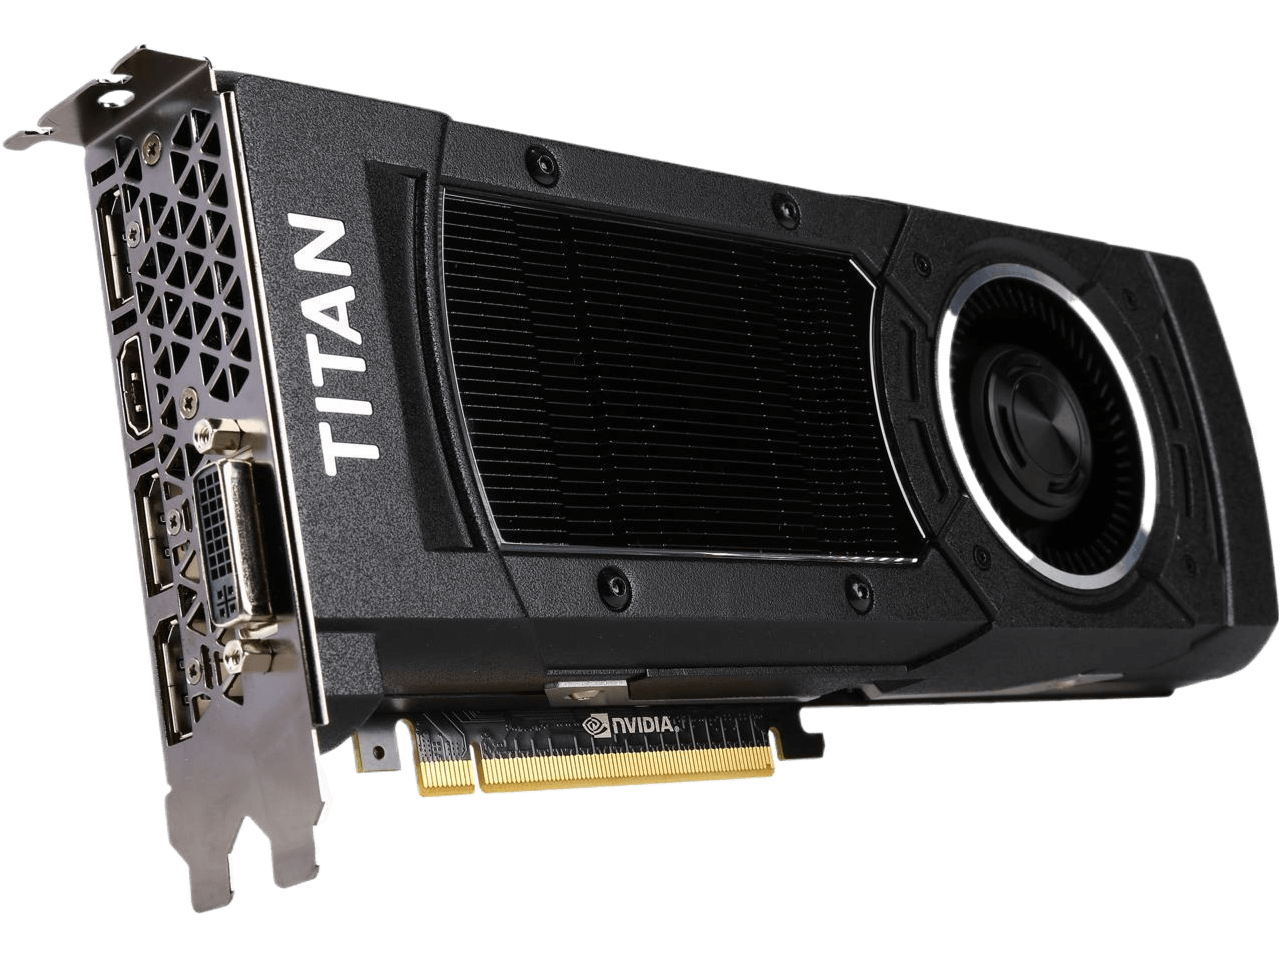 EVGA GeForce GTX TITAN X 12GB SC GAMING Play 4k with Ease Video Graphics Card 12G-P4-2992-KR